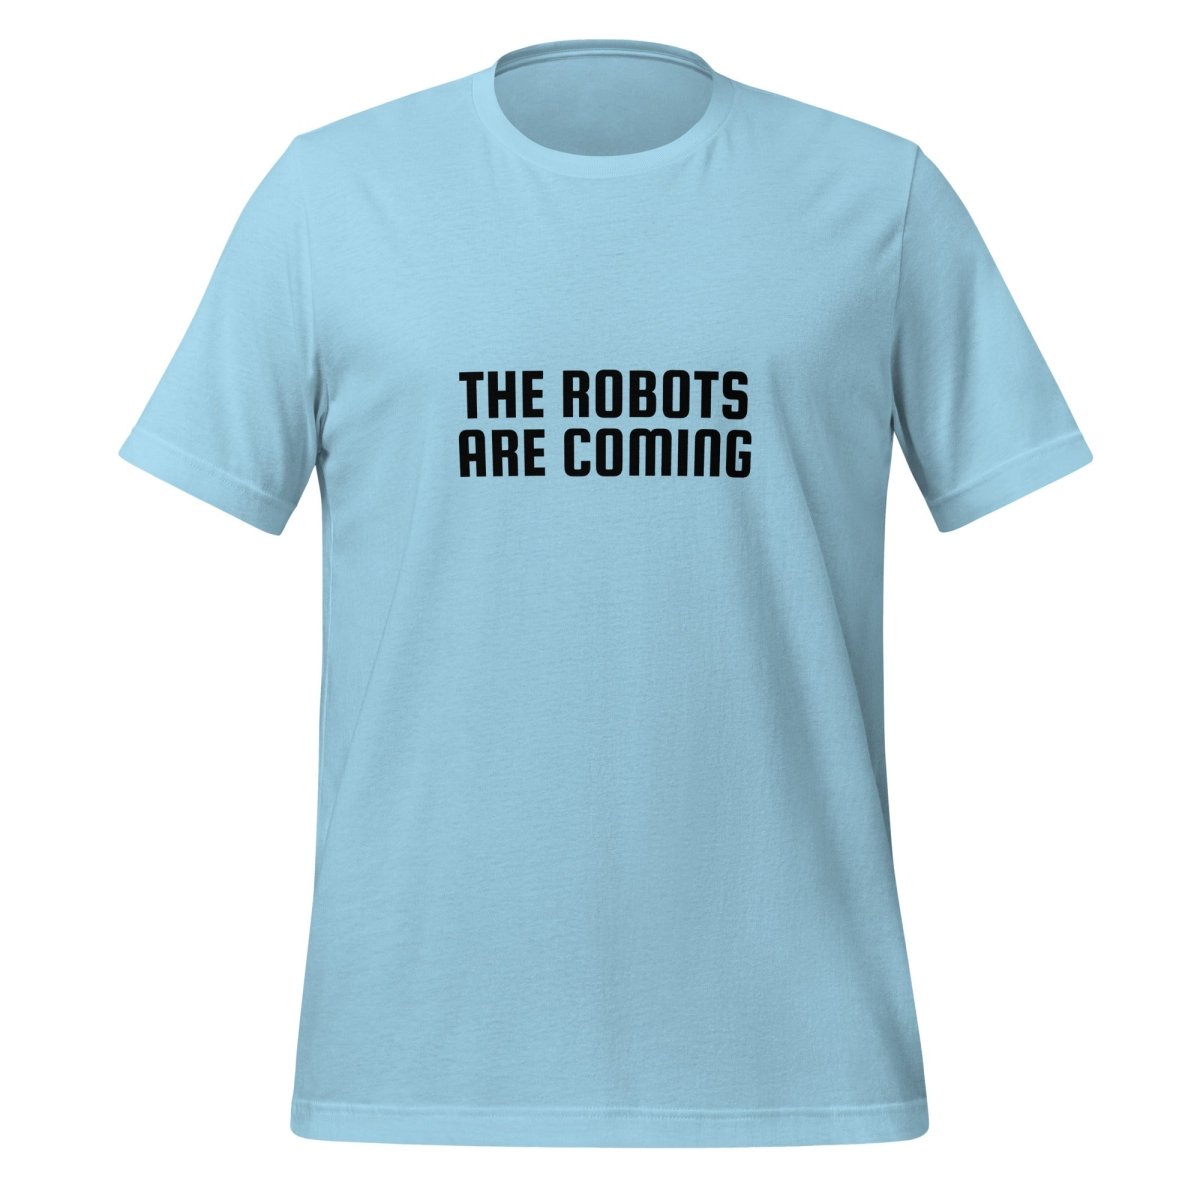 The Robots Are Coming in Black T - Shirt 2 (unisex) - Ocean Blue - AI Store